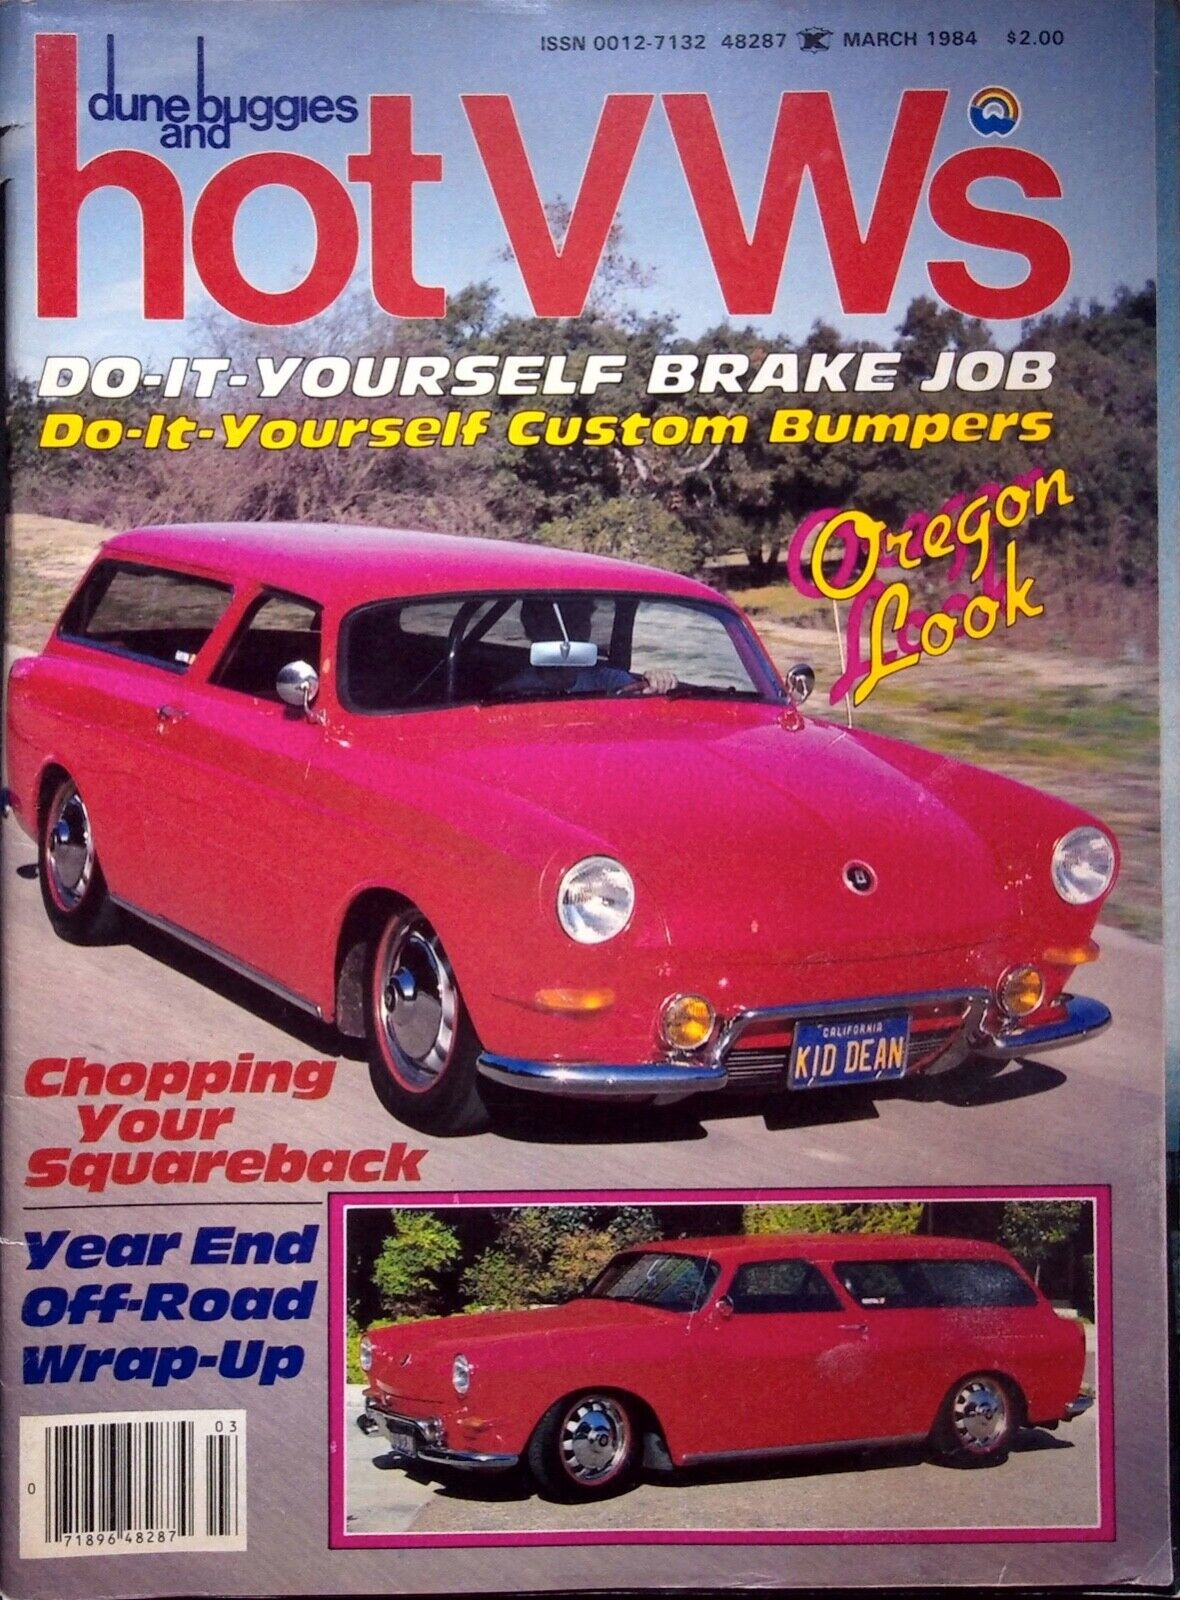 CHOPPING YOUR SQUAREBACK - HOT VW\'S MAGAZINE, VOLUME 17 NUMBER 3 MARCH 1984